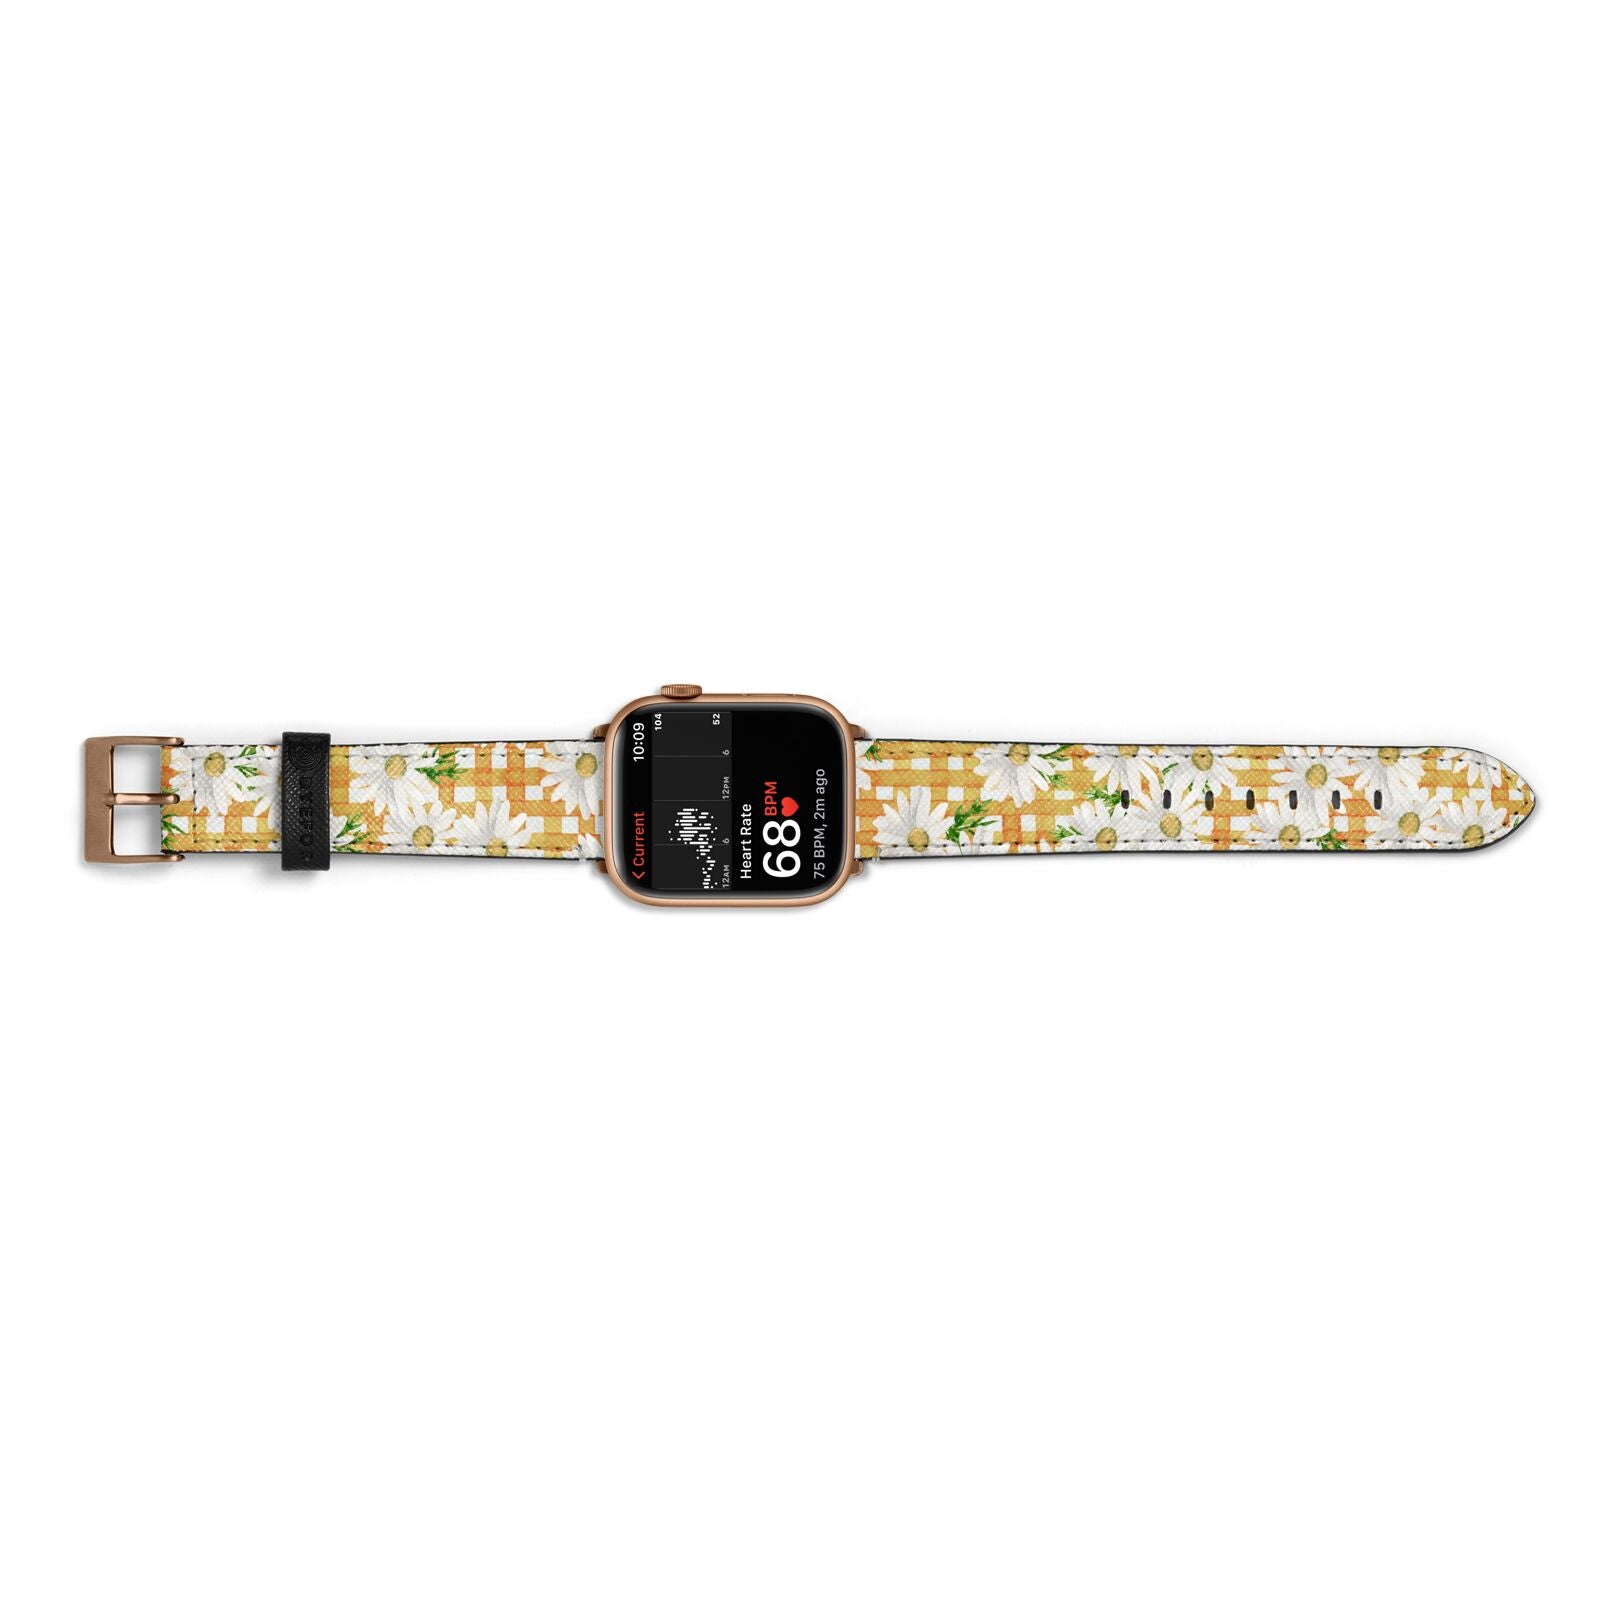 Checkered Daisy Apple Watch Strap Size 38mm Landscape Image Gold Hardware